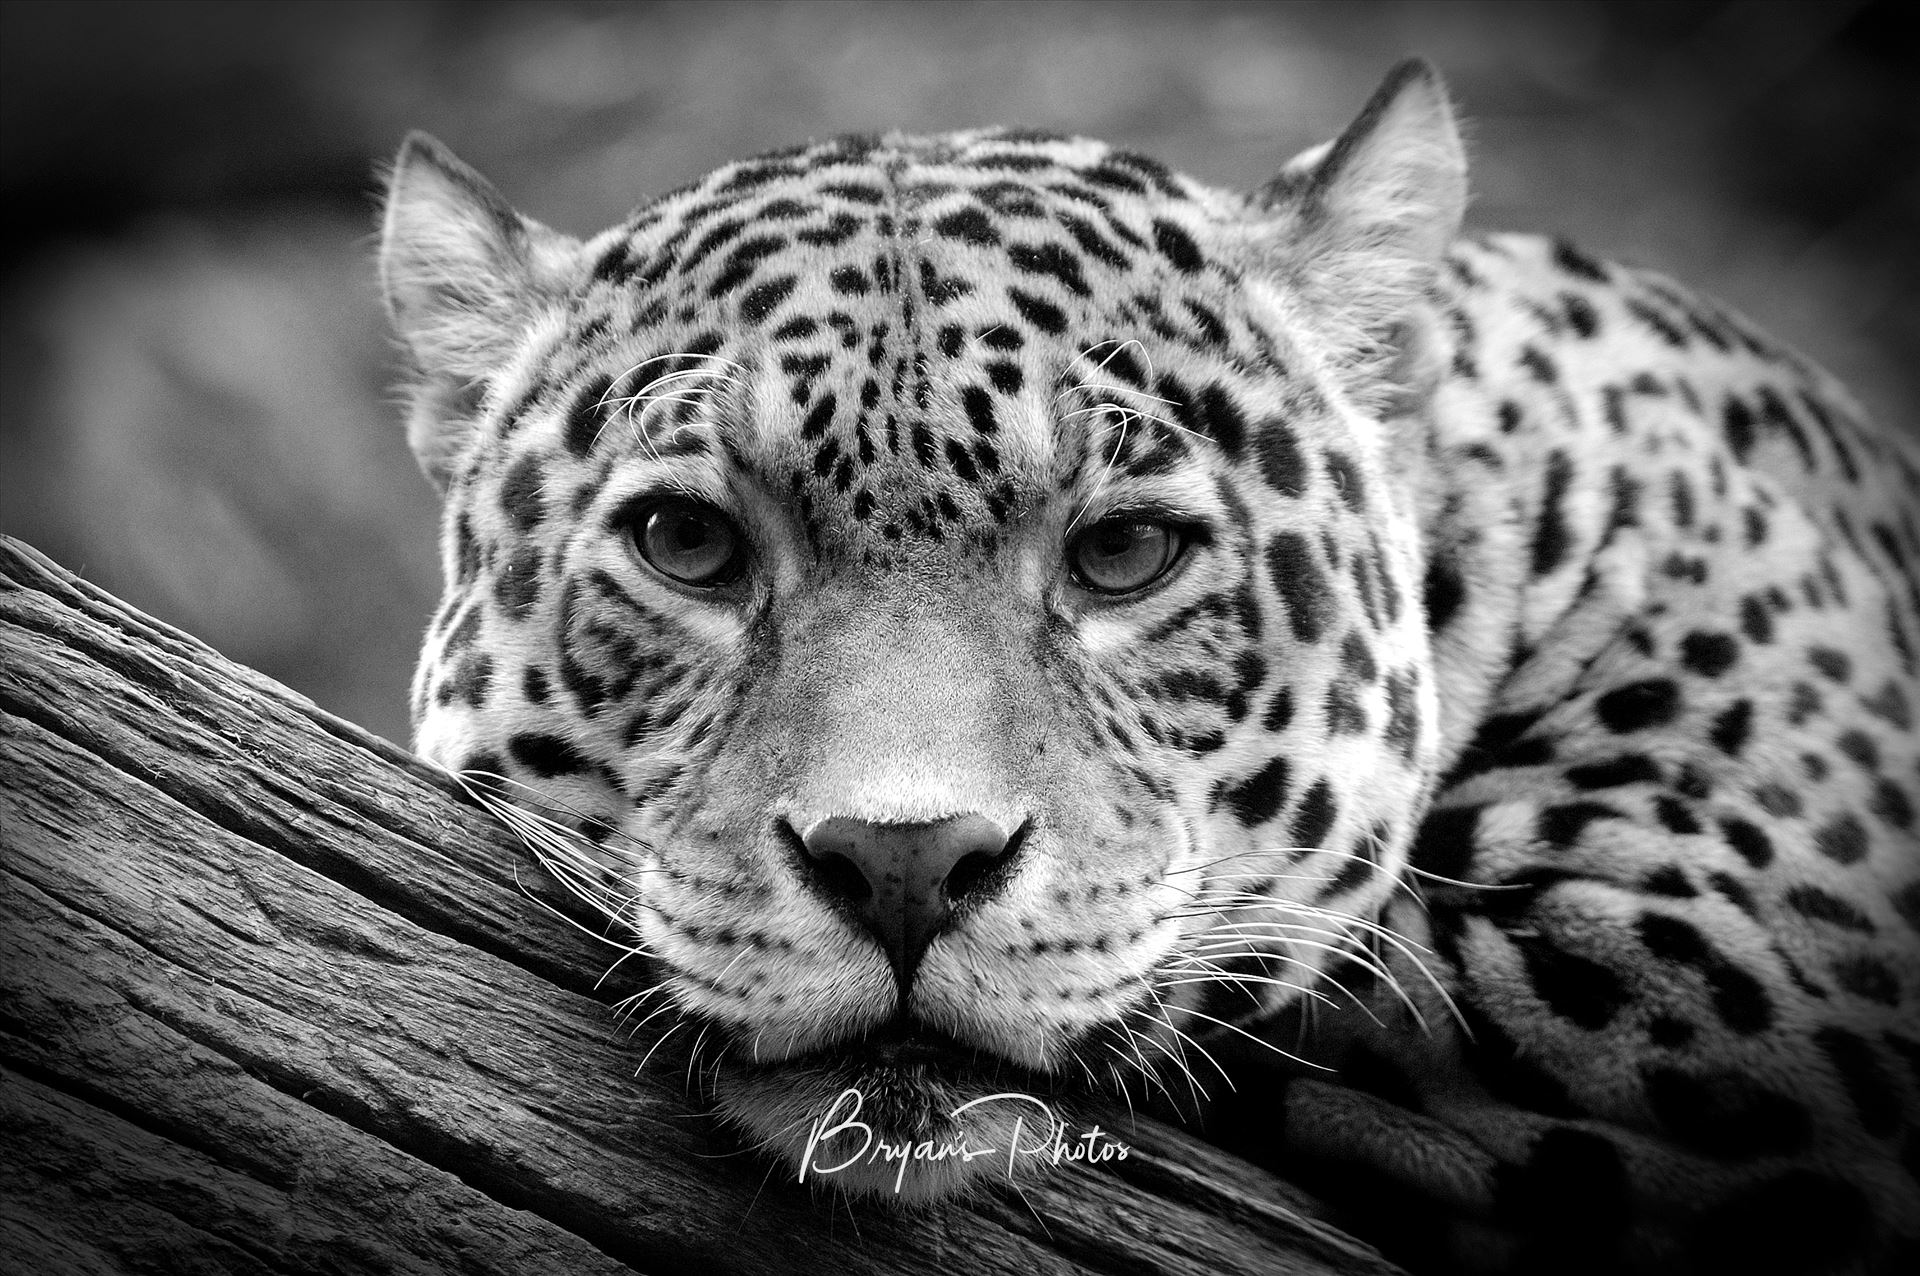 Jaguar Stare Black & White A photograph of a Jaguar staring straight at me in black & white by Bryans Photos